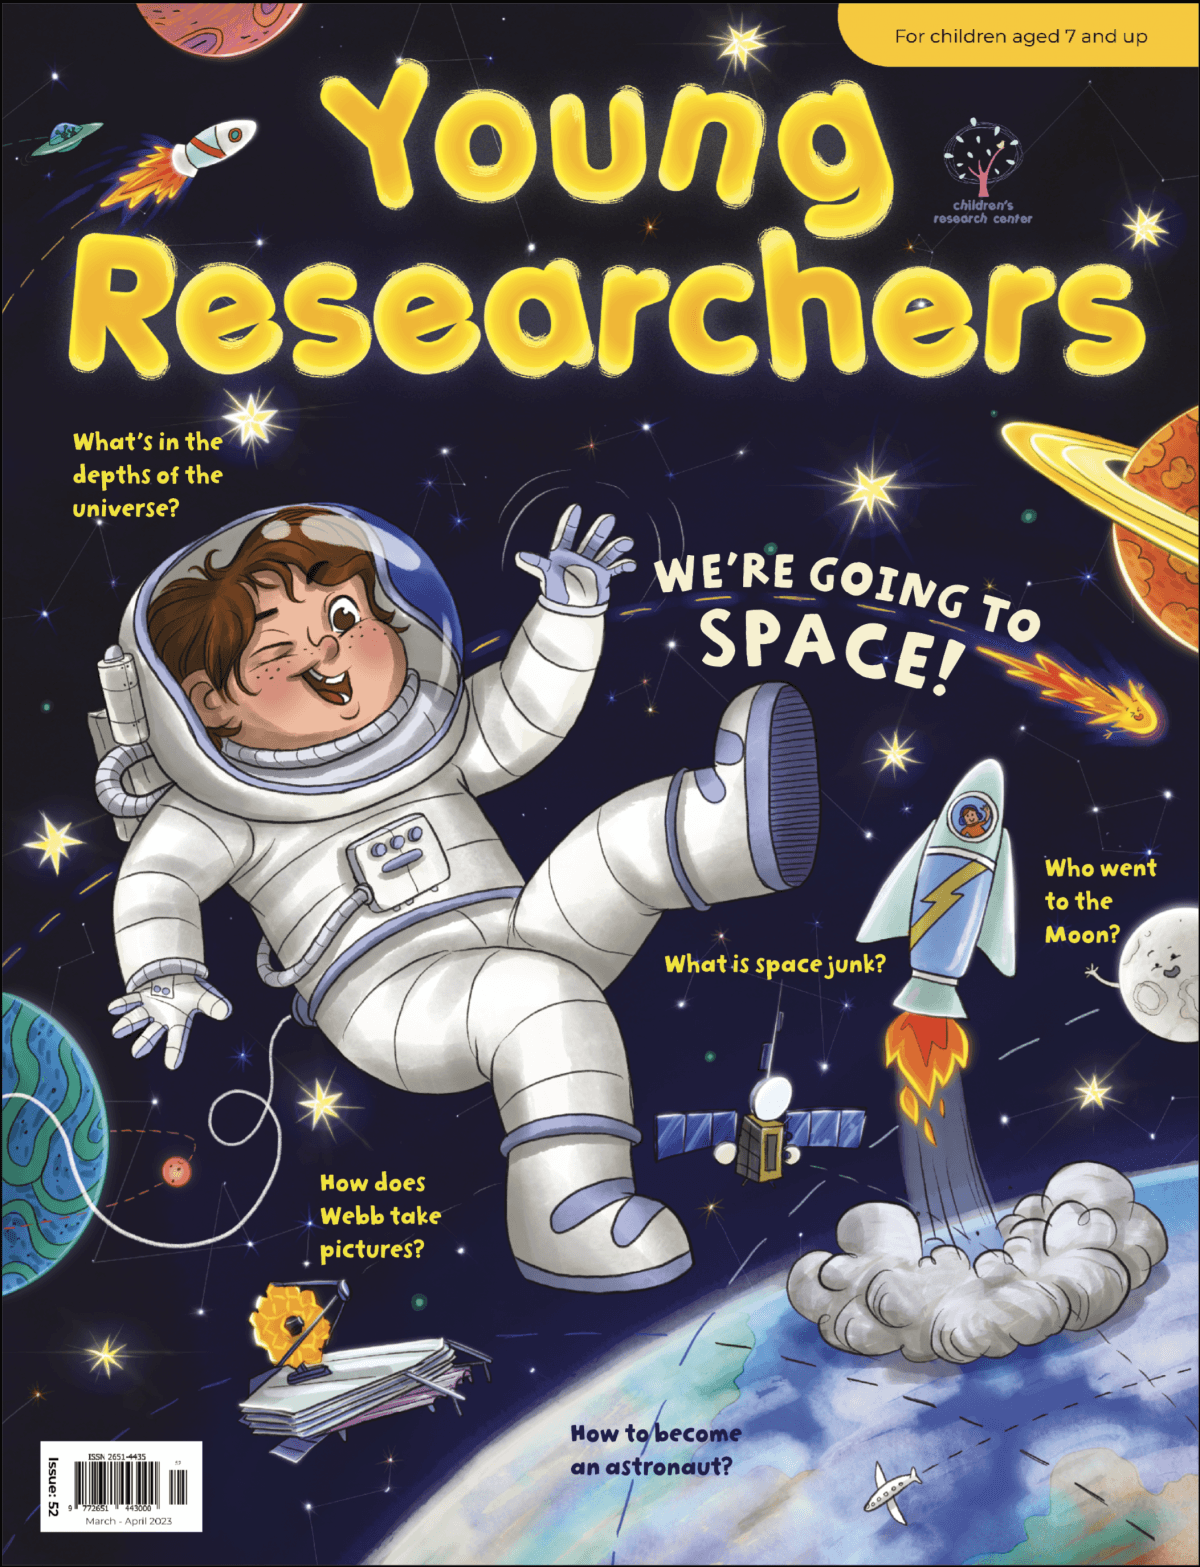 Young Researchers Issue 52: We're Going To Space!